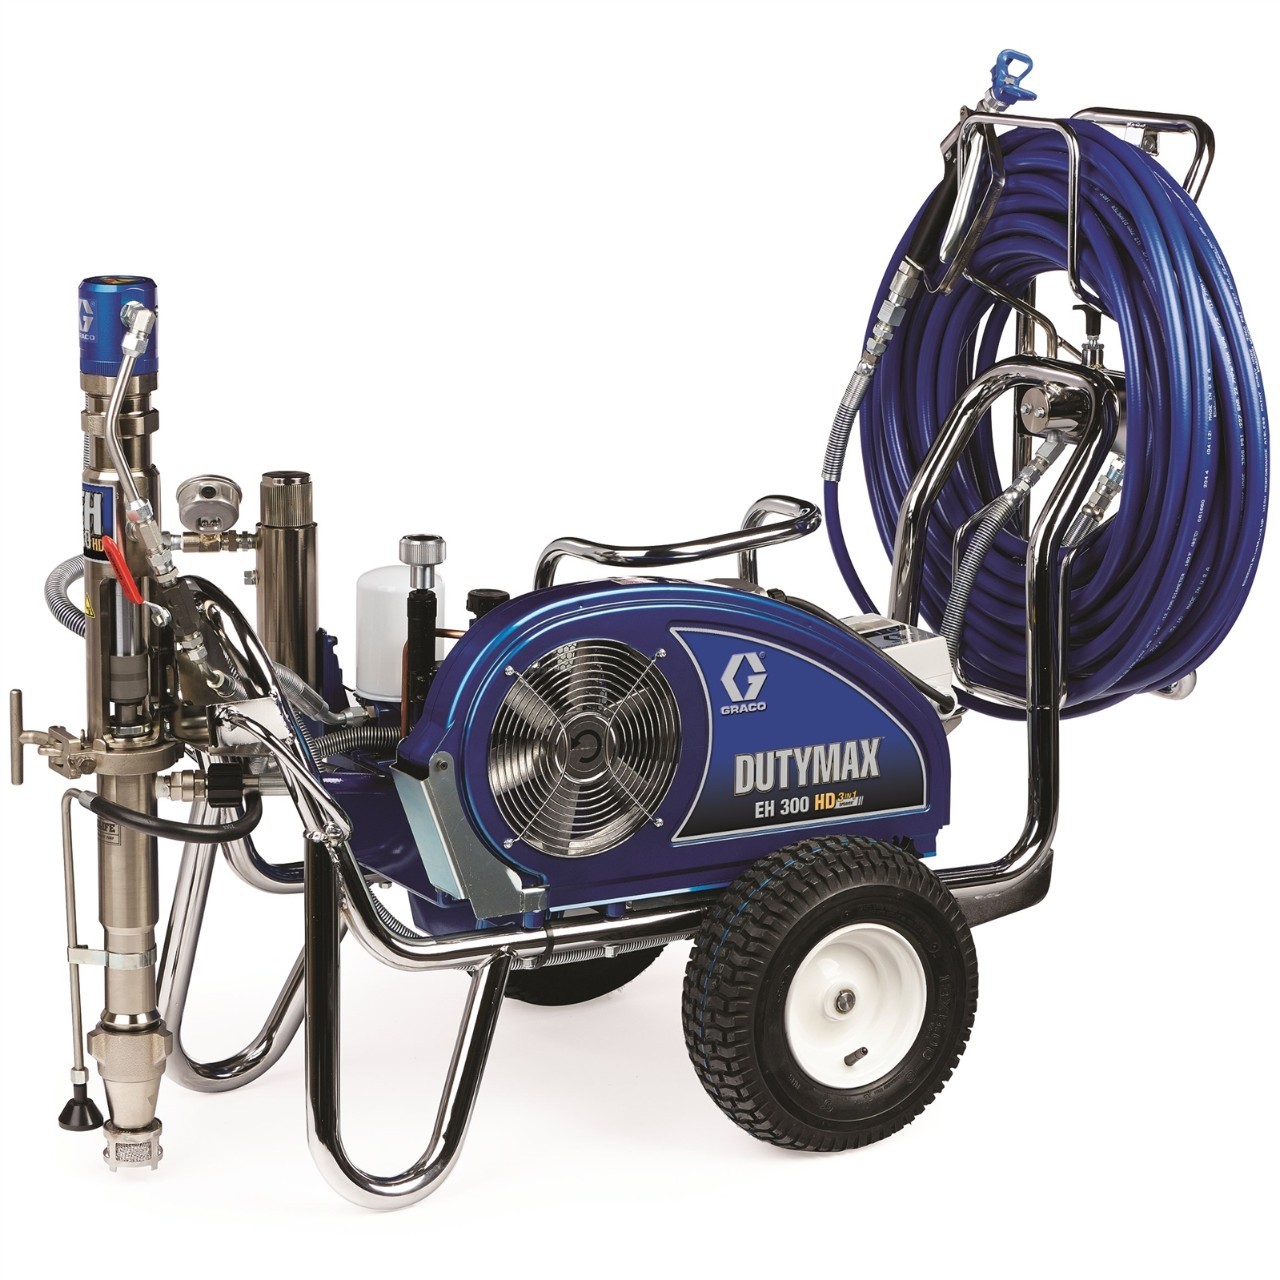 GRACO SELF-LEVELING UNDERLAYMENT MIXERS AND PUMPS